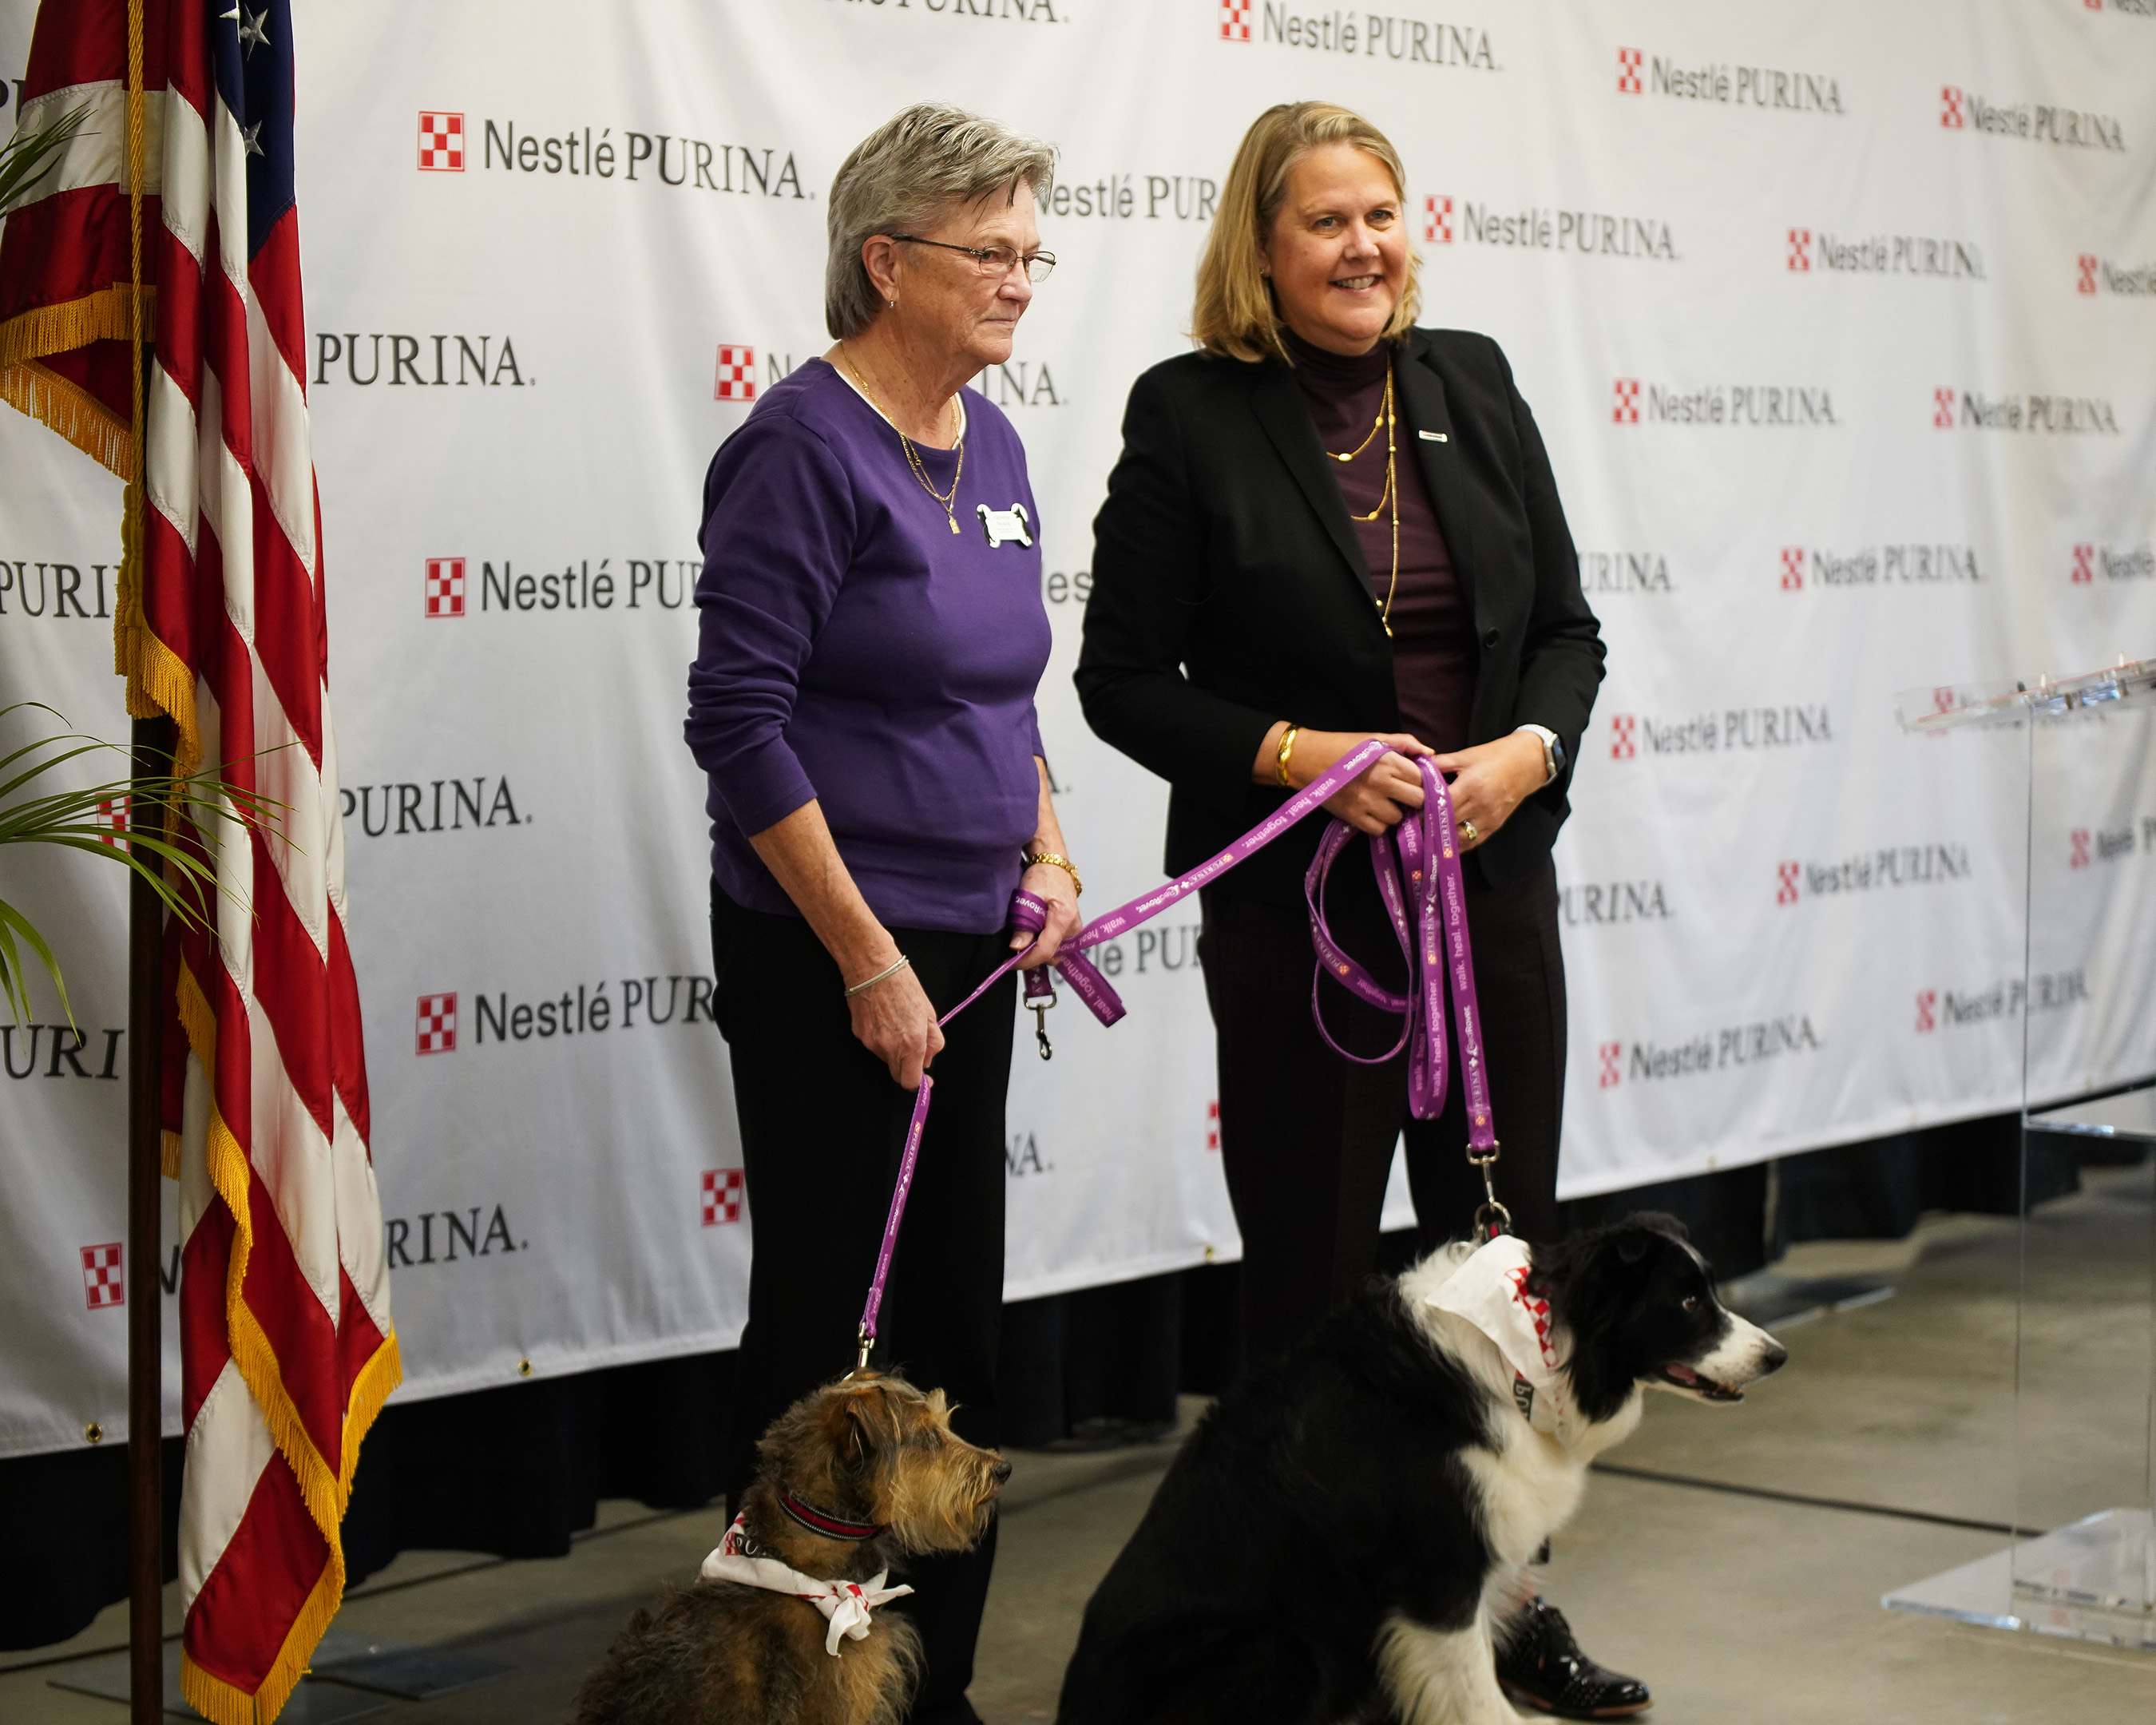 At the grand opening ceremony for Purina’s Hartwell factory, Purina also announced a $20,000 donation to the Northeast Georgia Council on Domestic Violence (NGCDV) as part of its Purple Leash Project, a partnership between Purina and national non-profit RedRover. Pictured left is Katherine Reusing, Executive Director of Northeast Georgia Council on Domestic Violence, and pictured right is Purina President Nina Leigh Krueger.